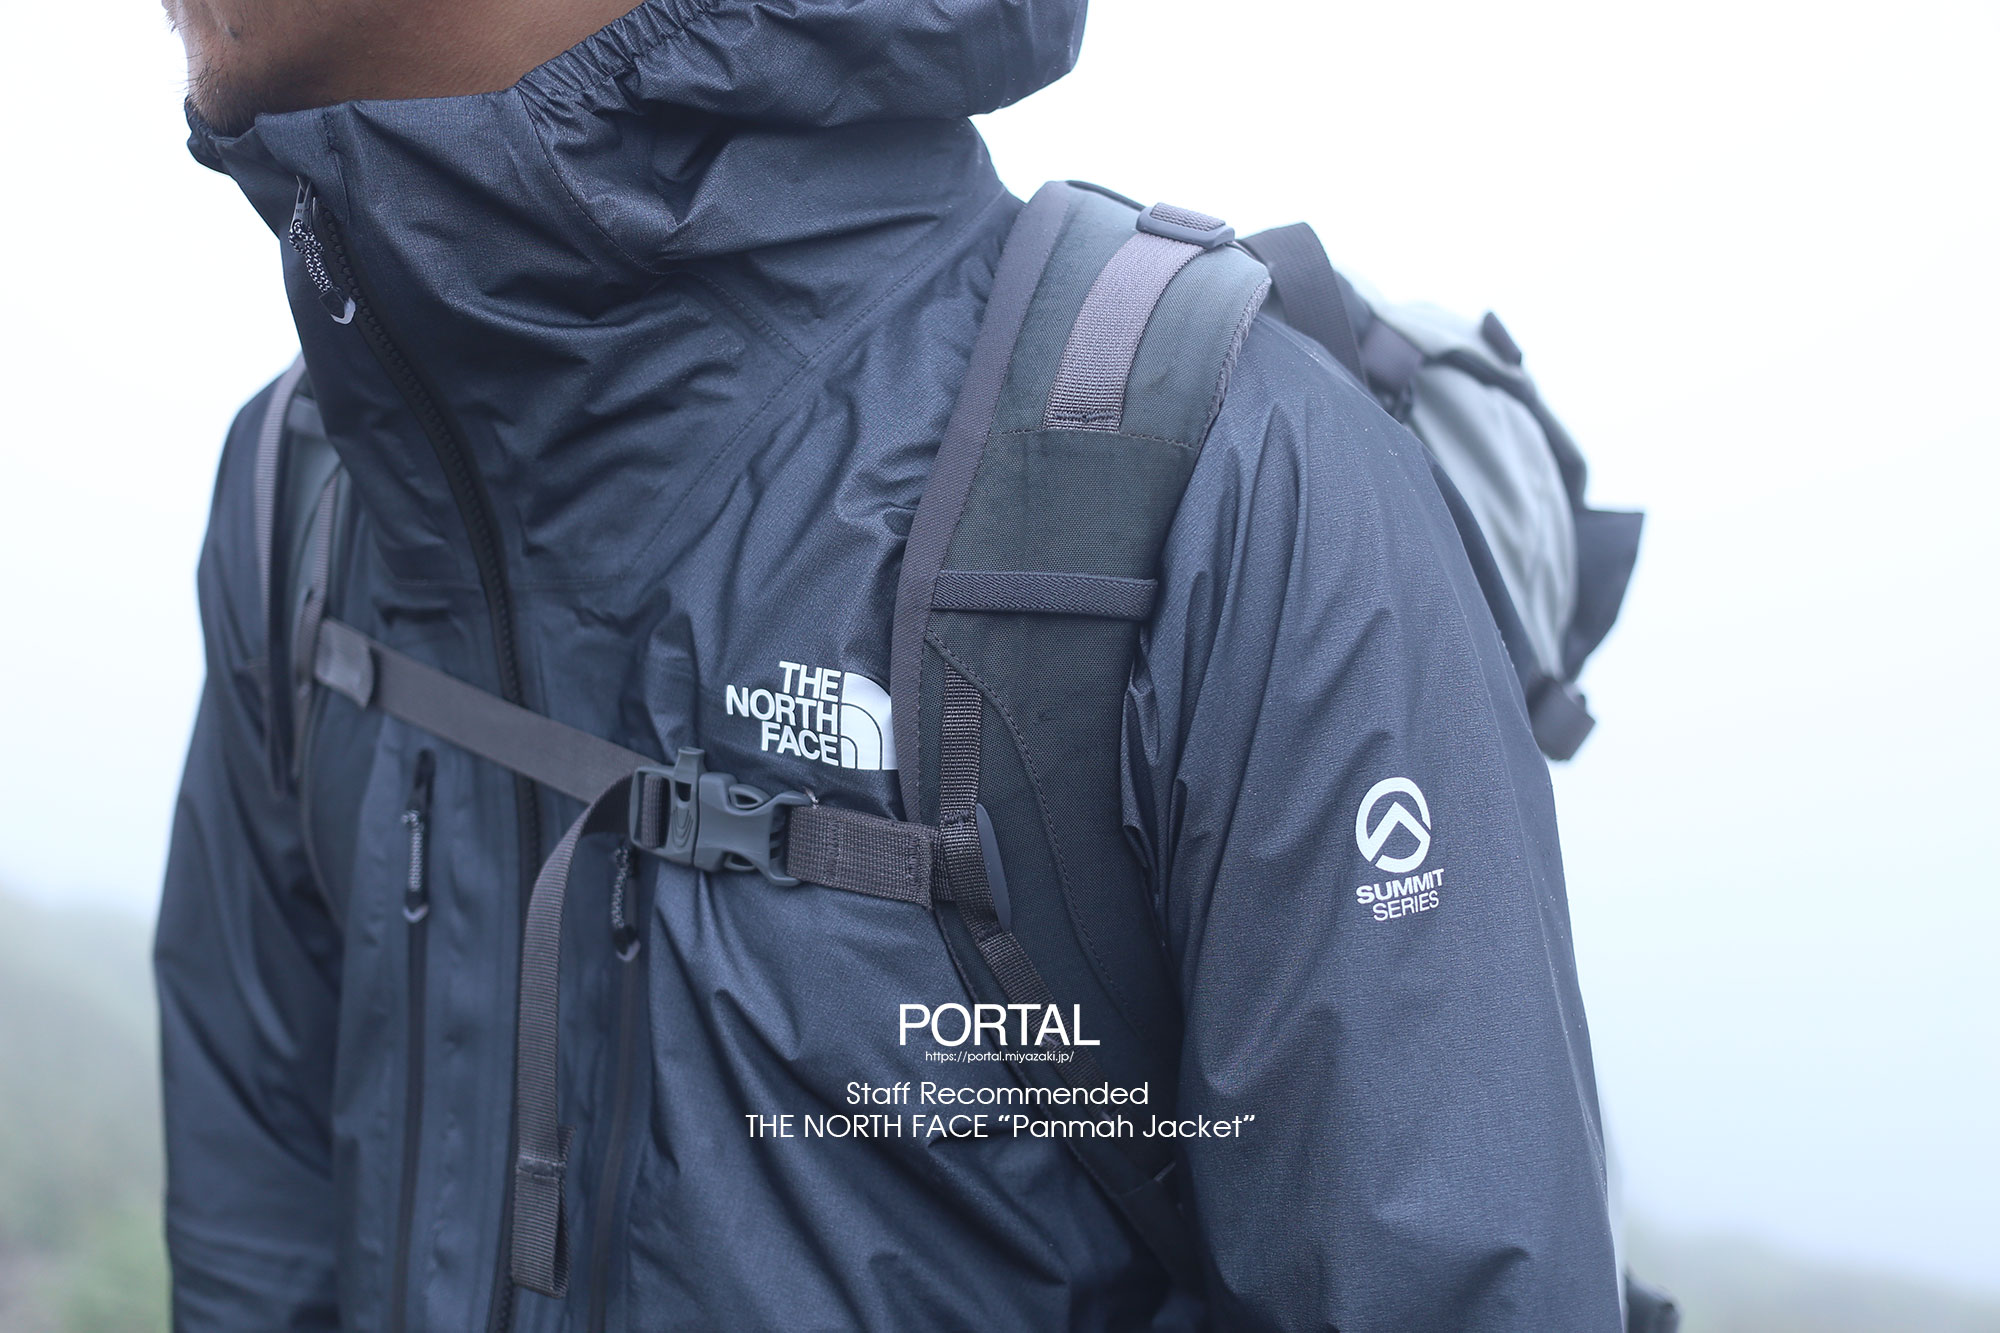 THE NORTH FACE "Panmah Jacket"